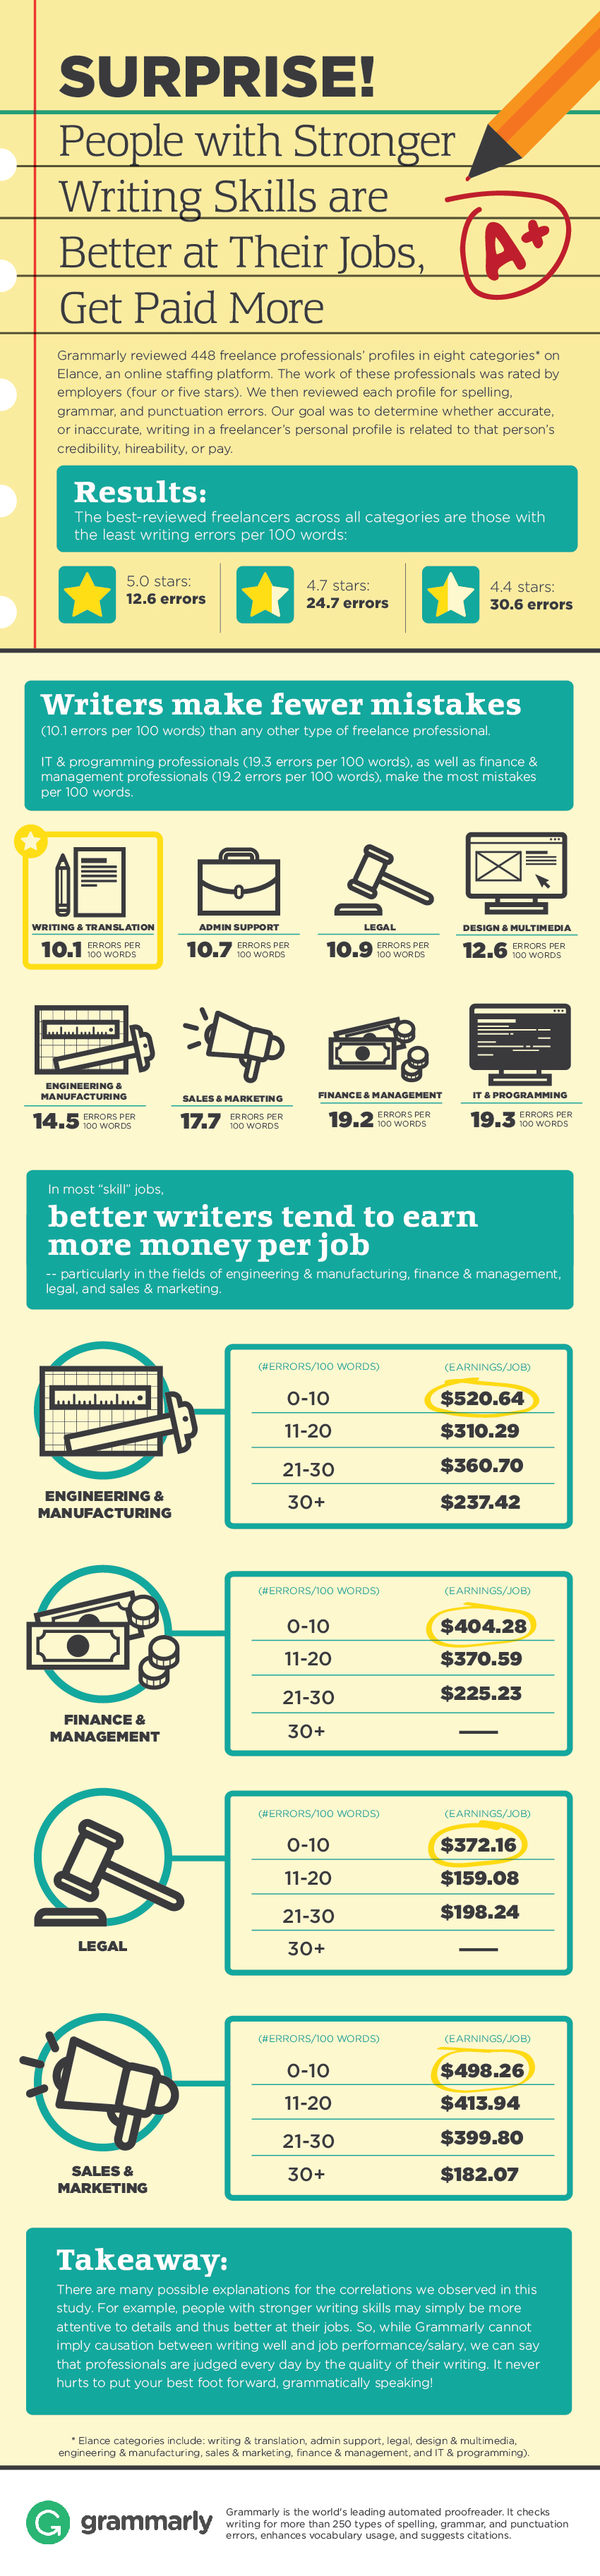 Writing Skills and improved professional careers, more pay infographic